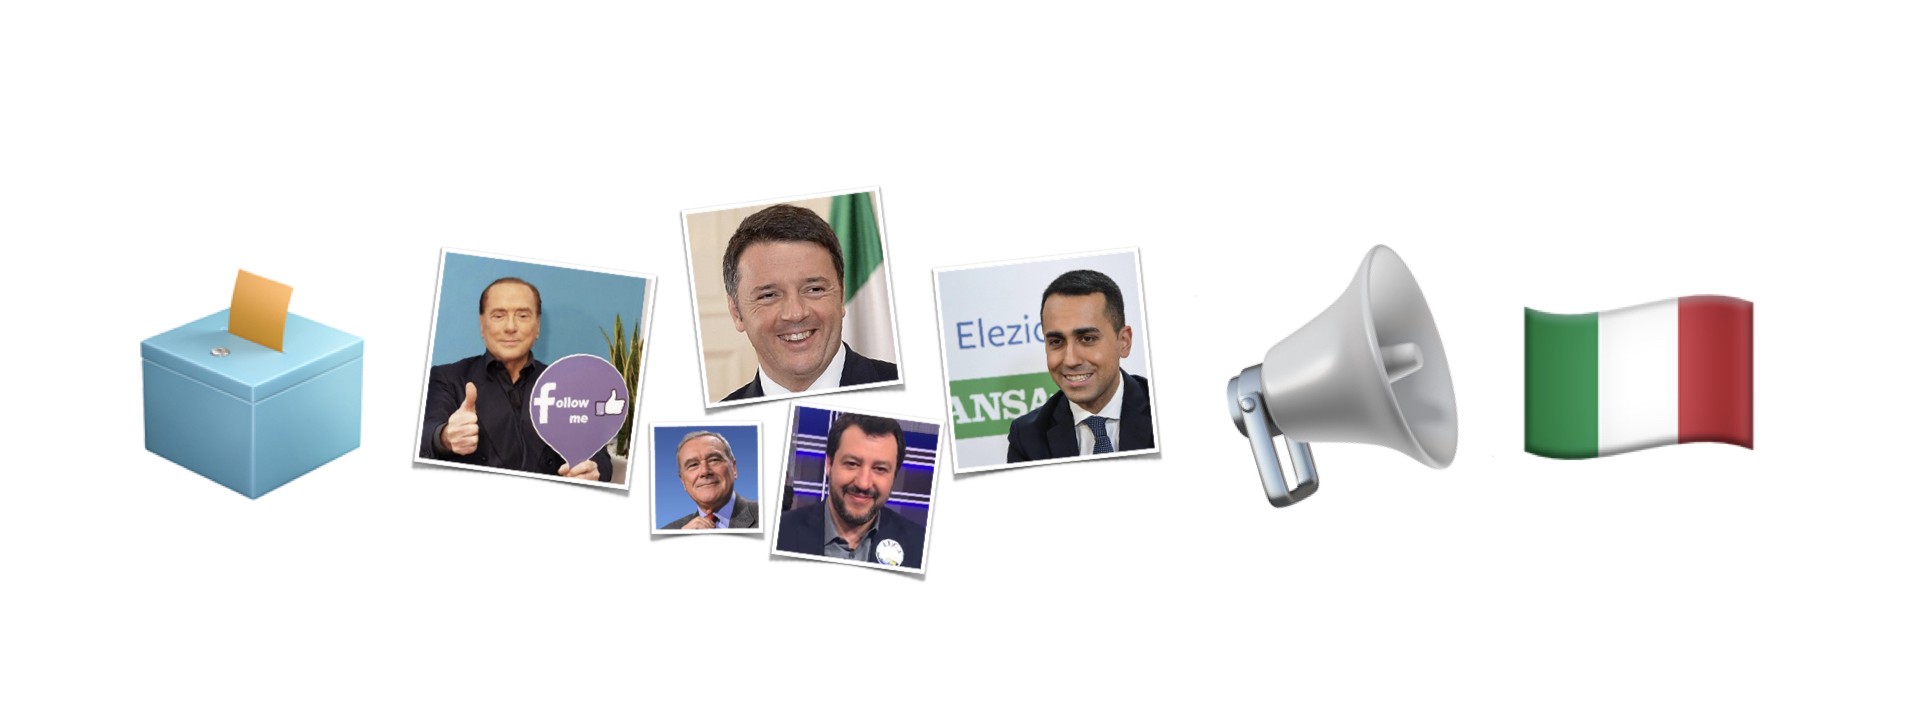 #ElectionWatch: A Guide To Italian Elections